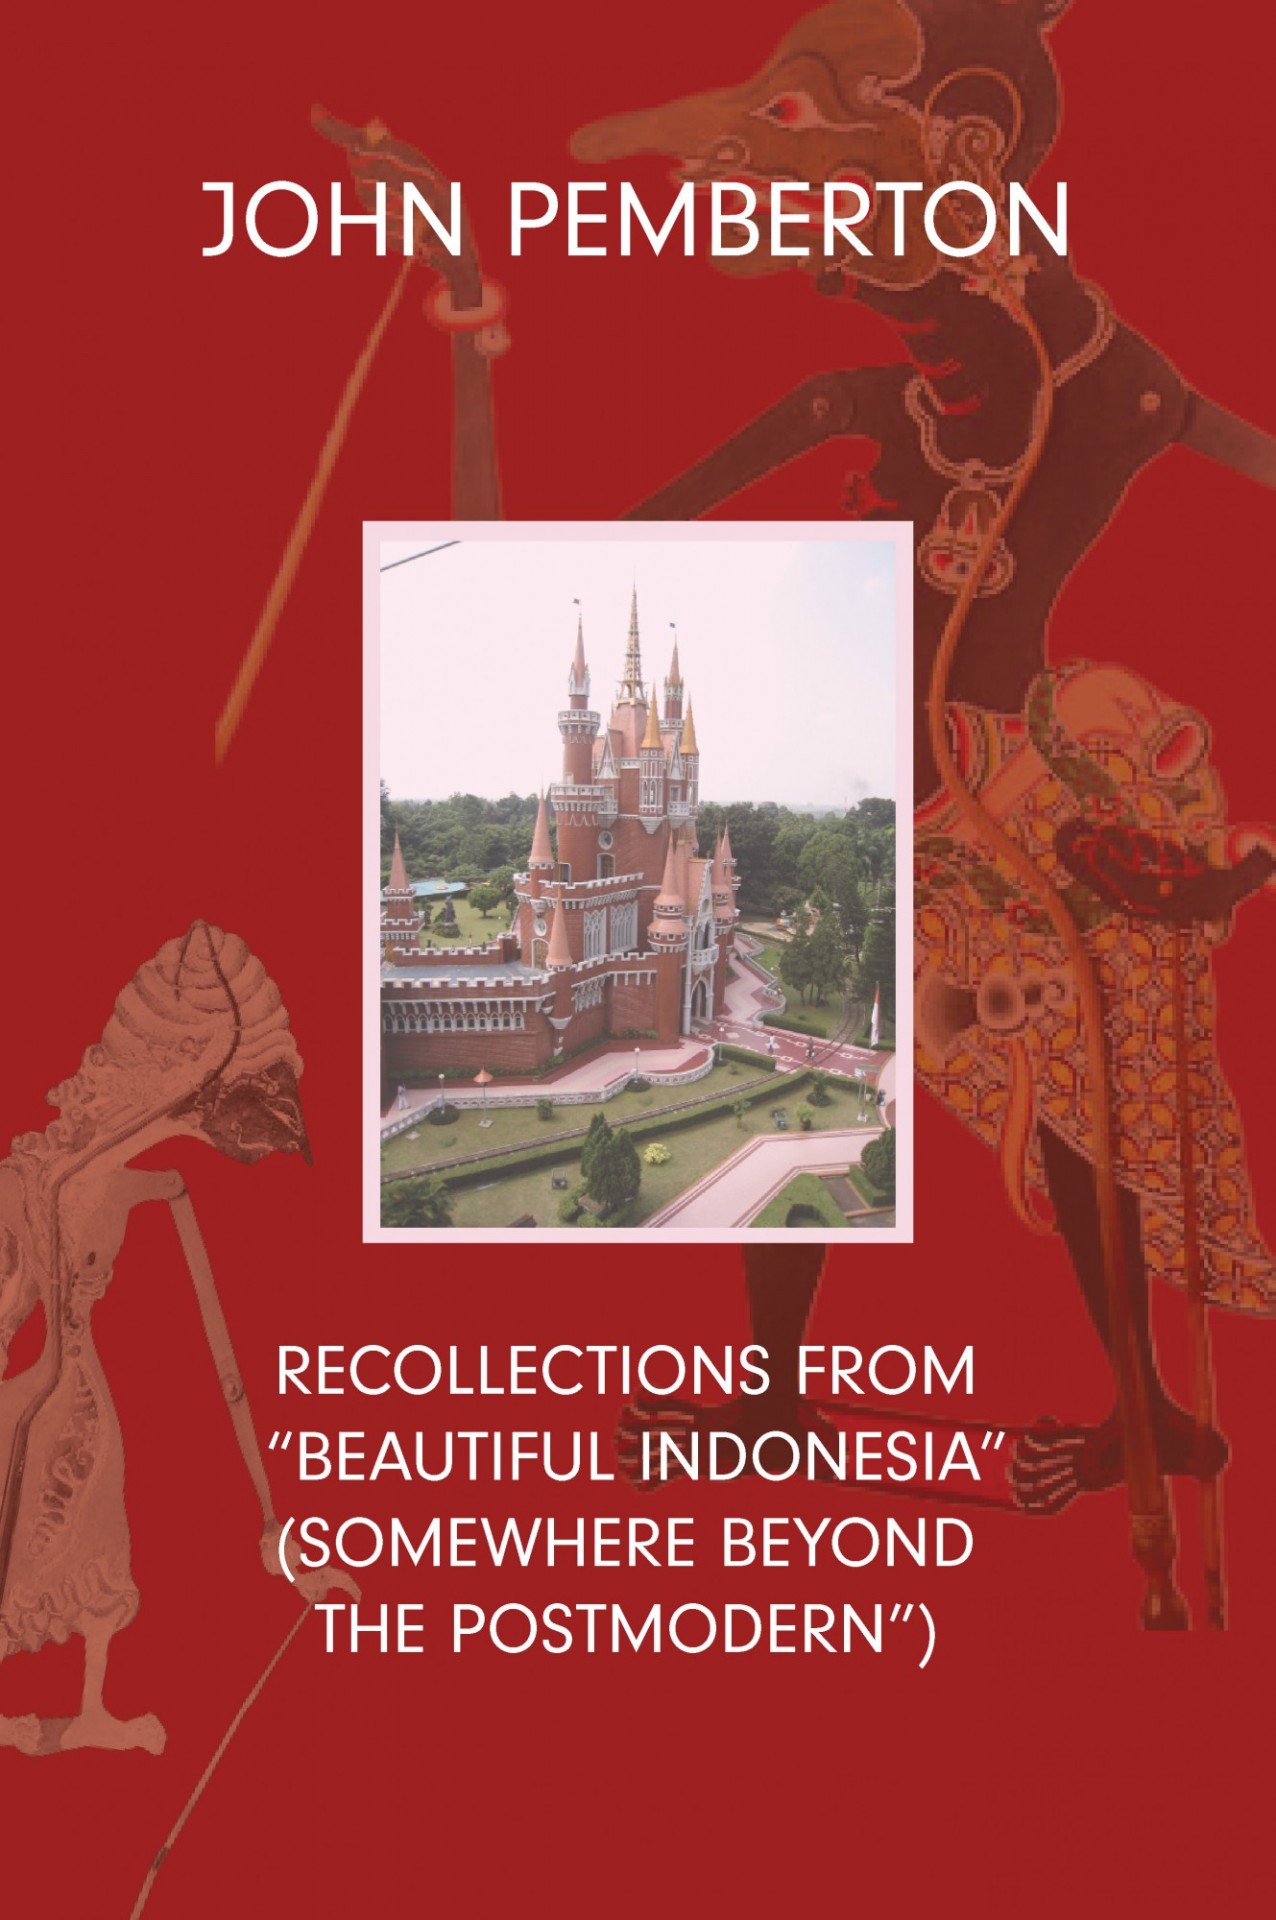 John Pemberton, 'Recollections from 'Beautiful Indonesia' (Somewhere Beyond the Postmodern)